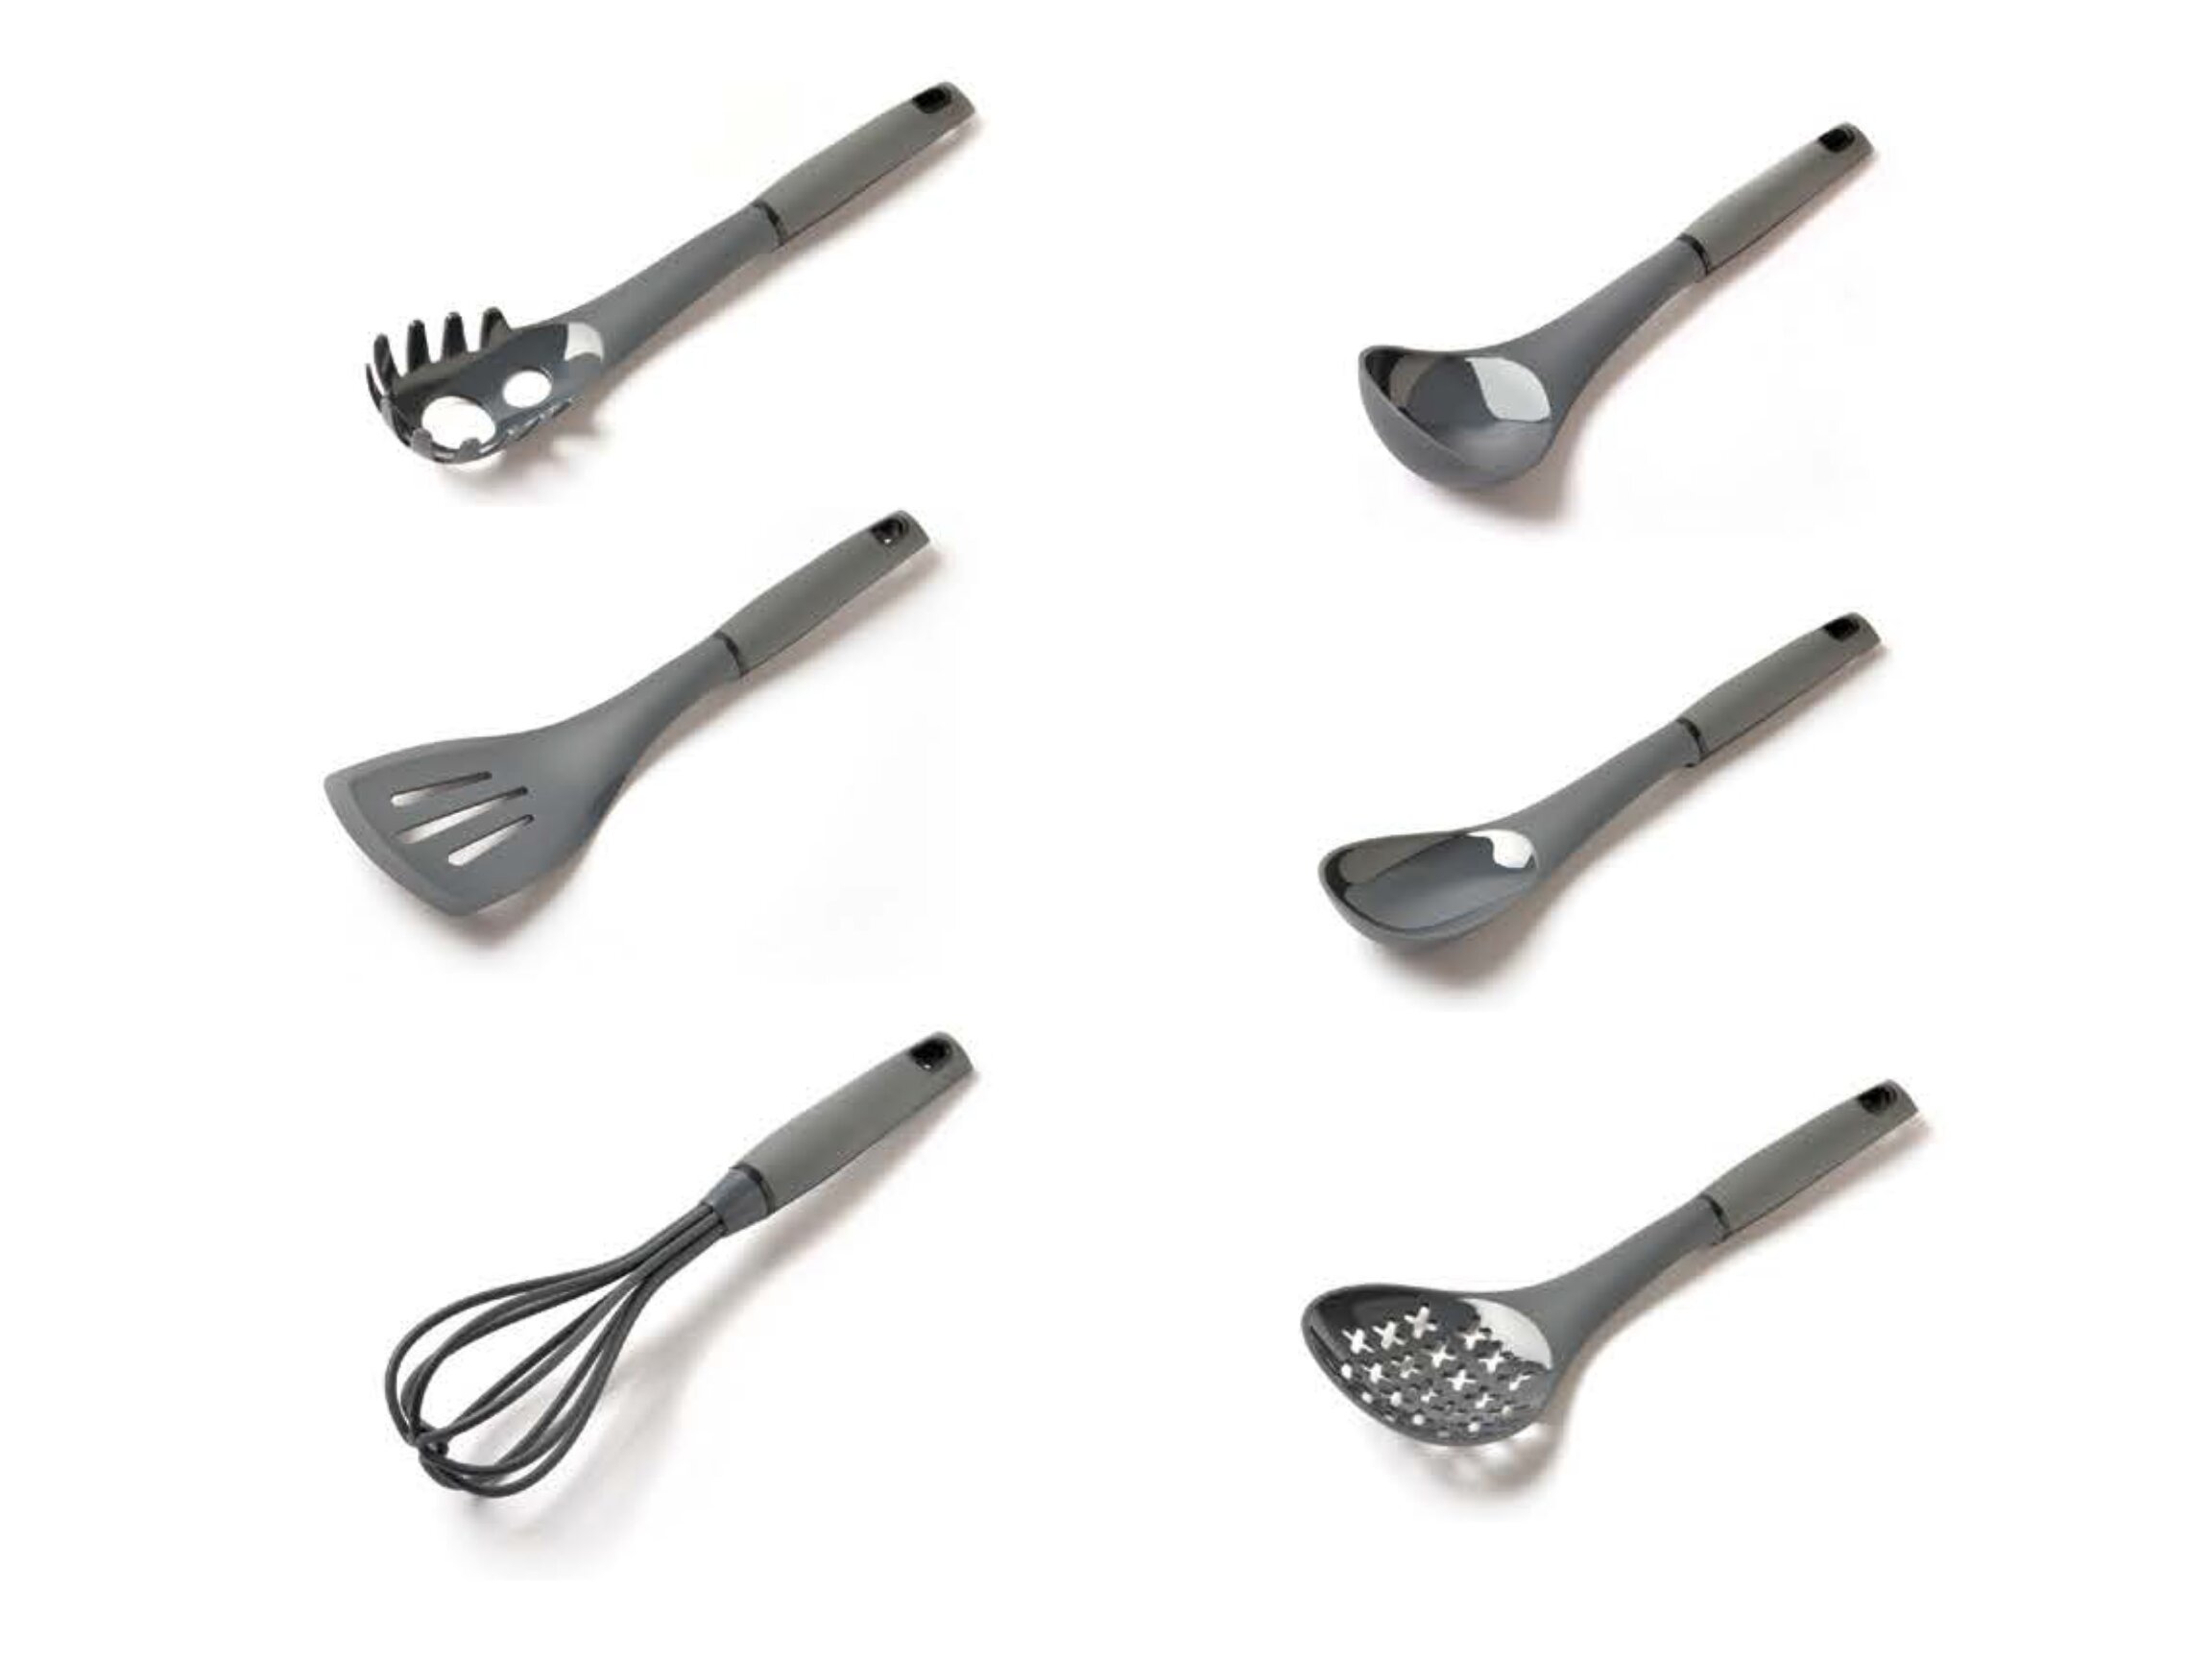 ExcelSteel 6-Piece Nylon Utensil Set with Stainless Steel Handles